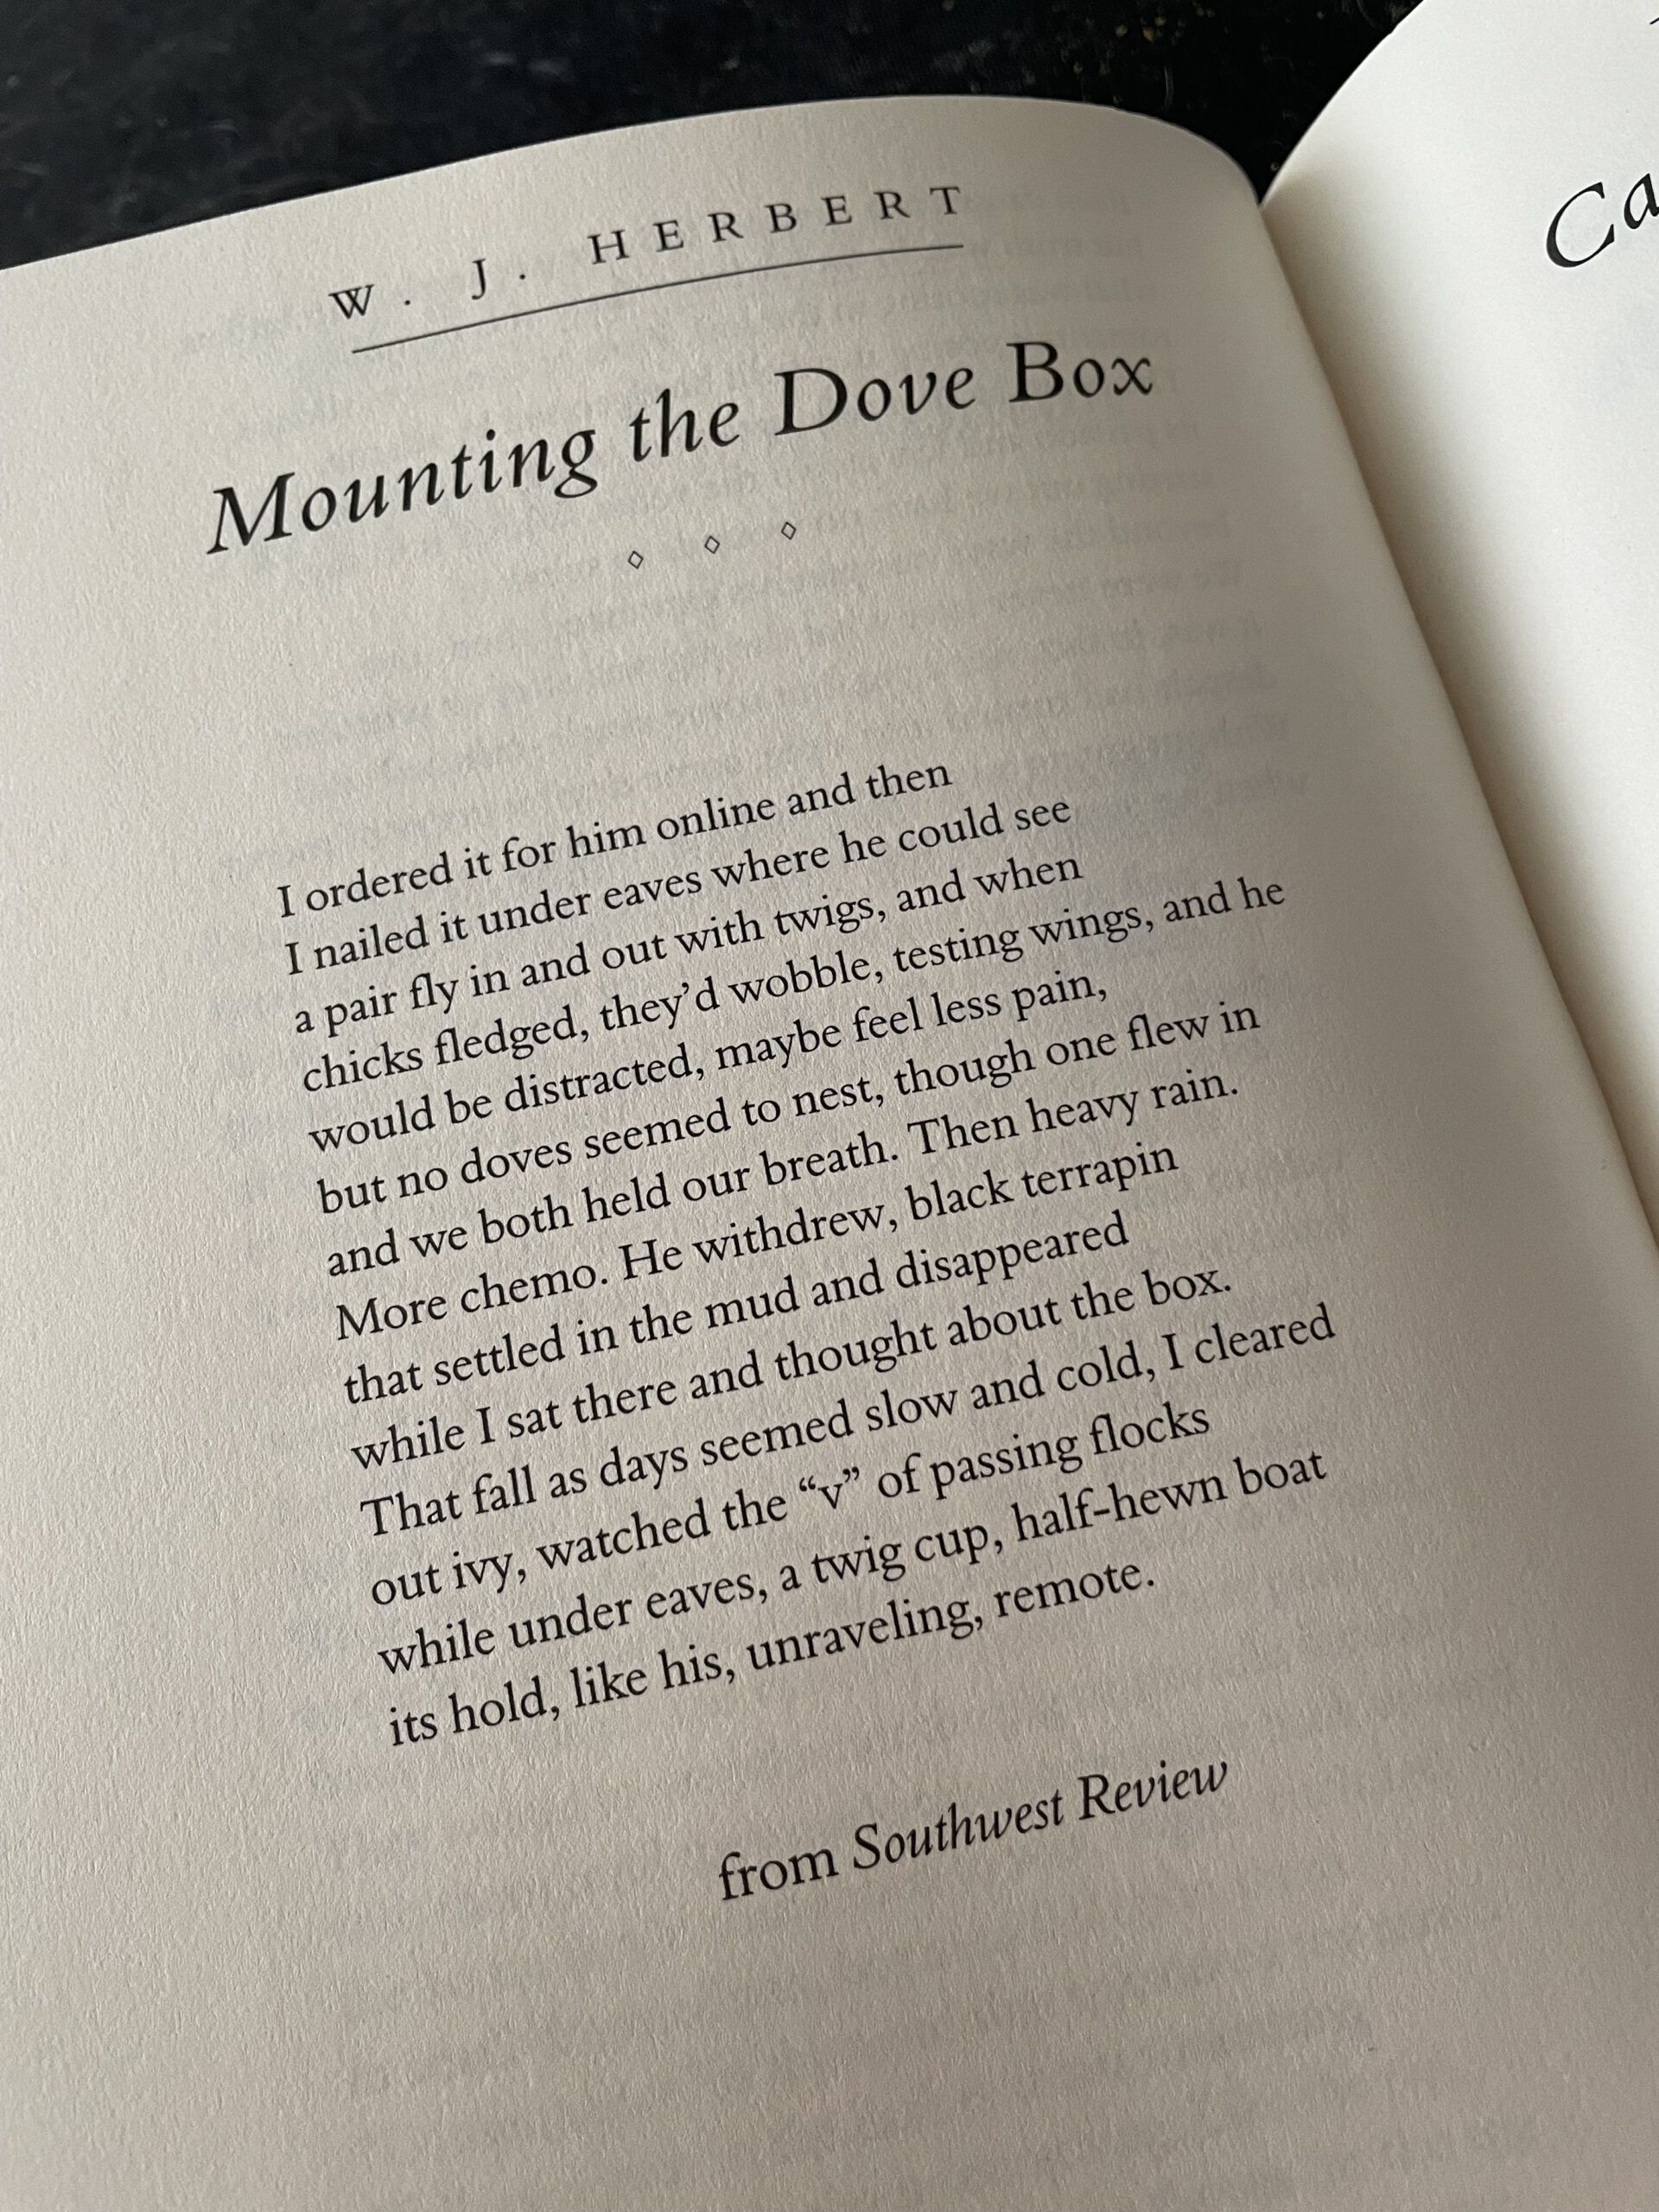 image of Mounting the Dove Box sonnet from WJ Herbert